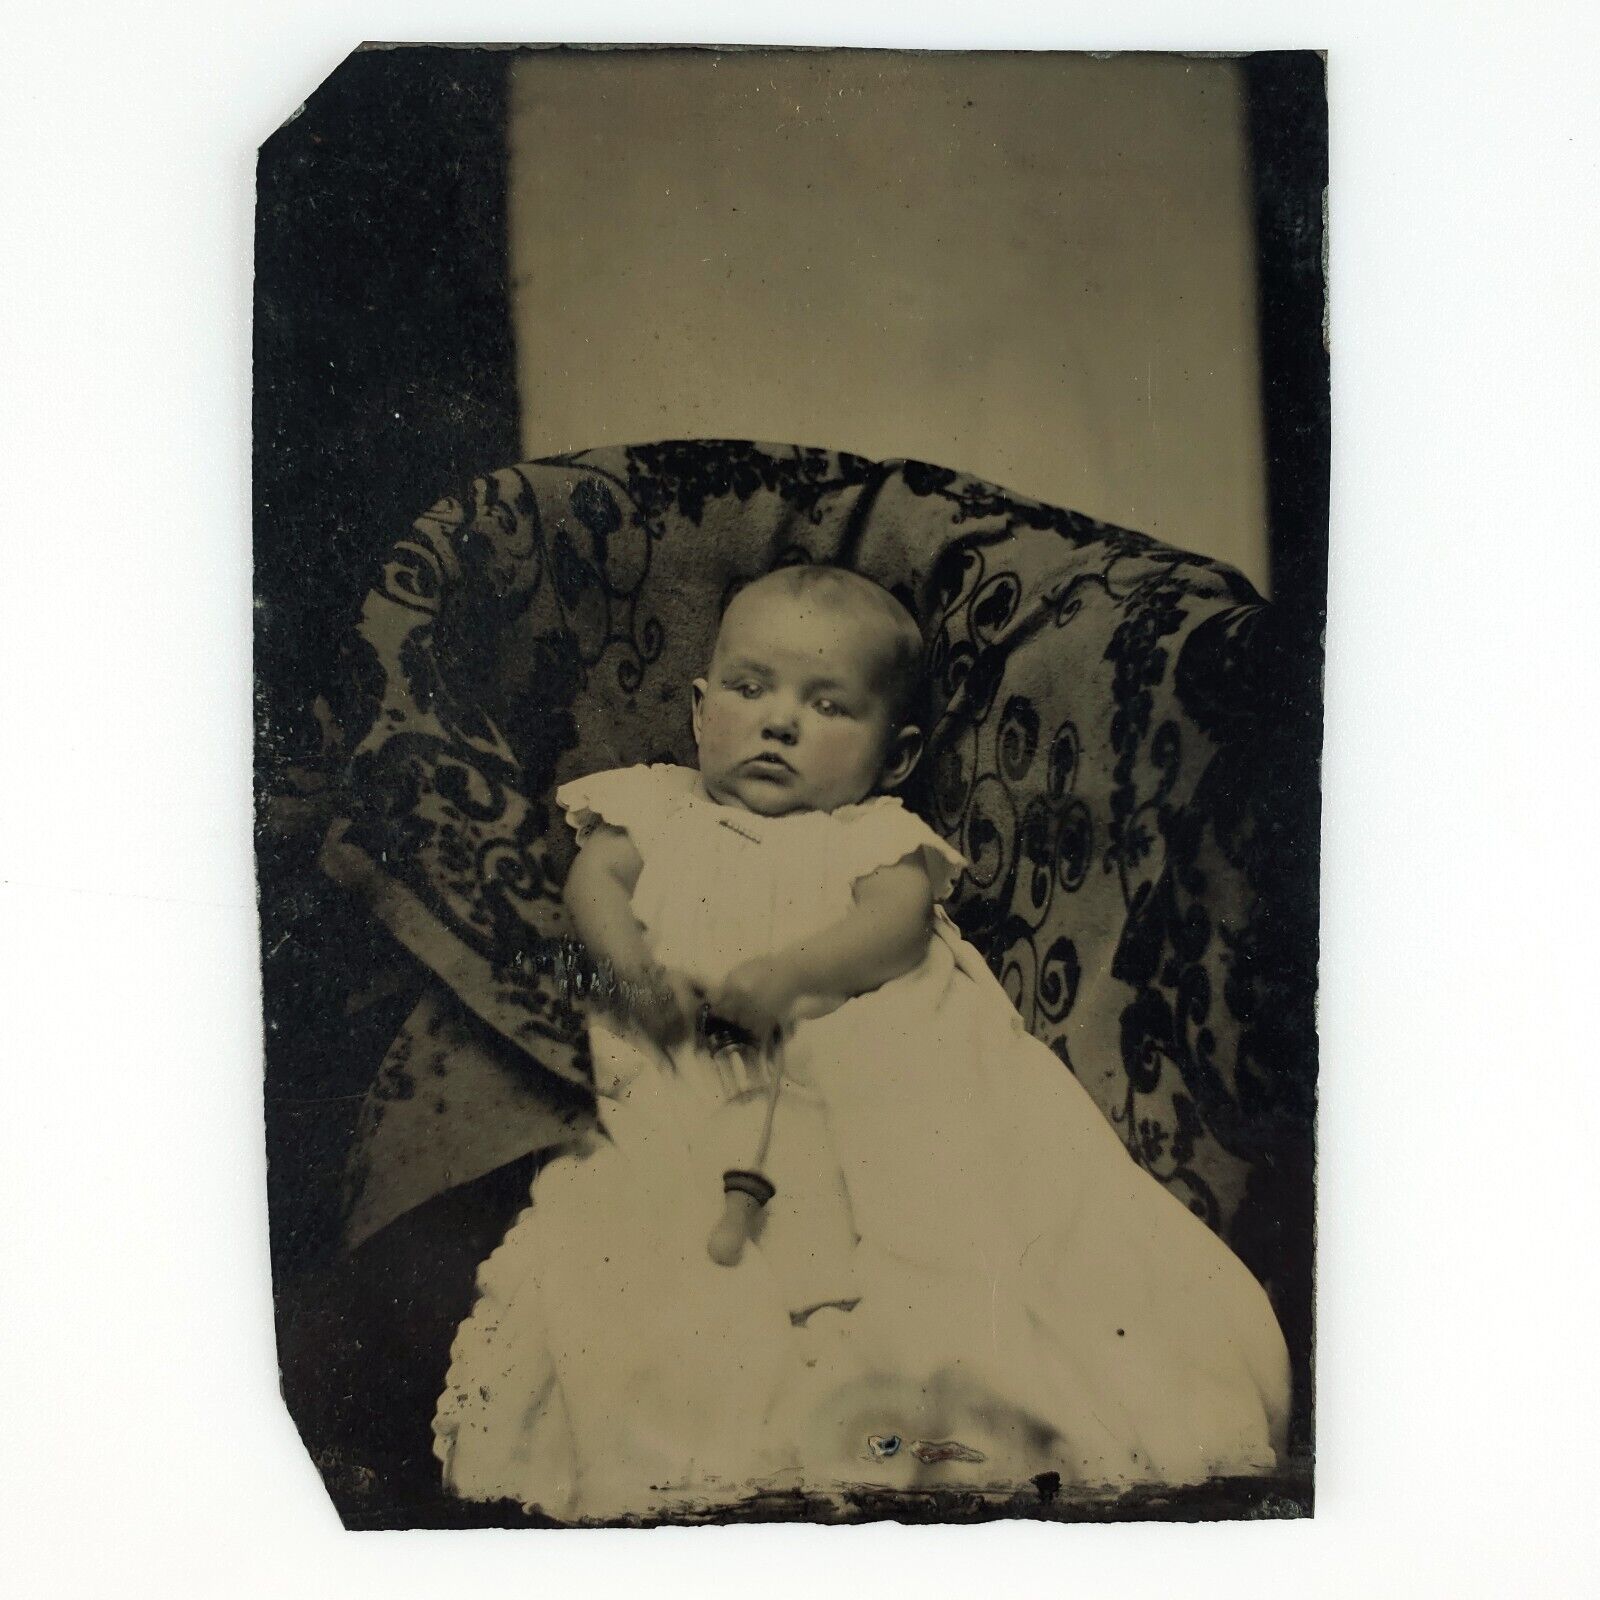 Named Foster Connecticut Baby Tintype c1878 Antique 1/6 Plate Child Photo H778